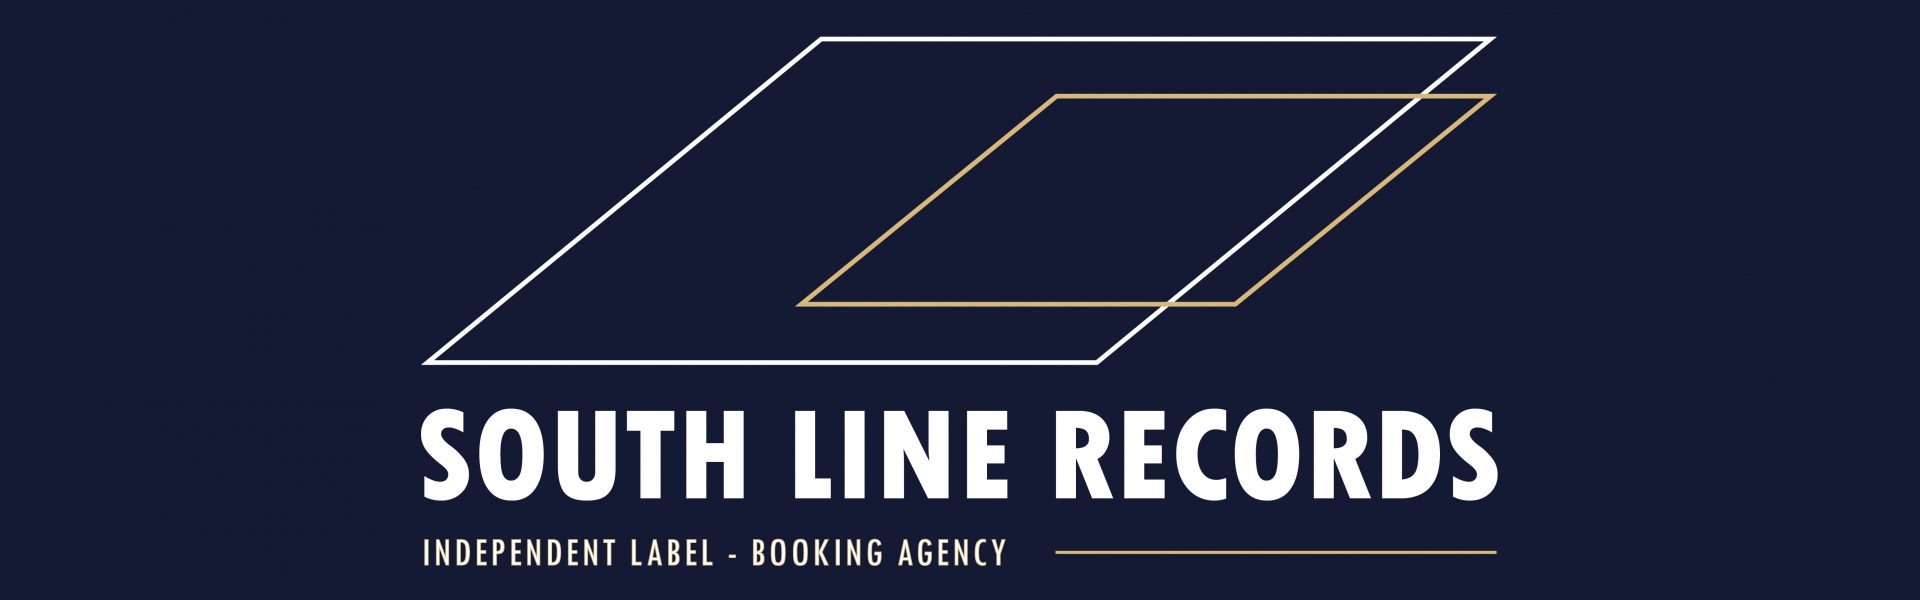 South Line Records